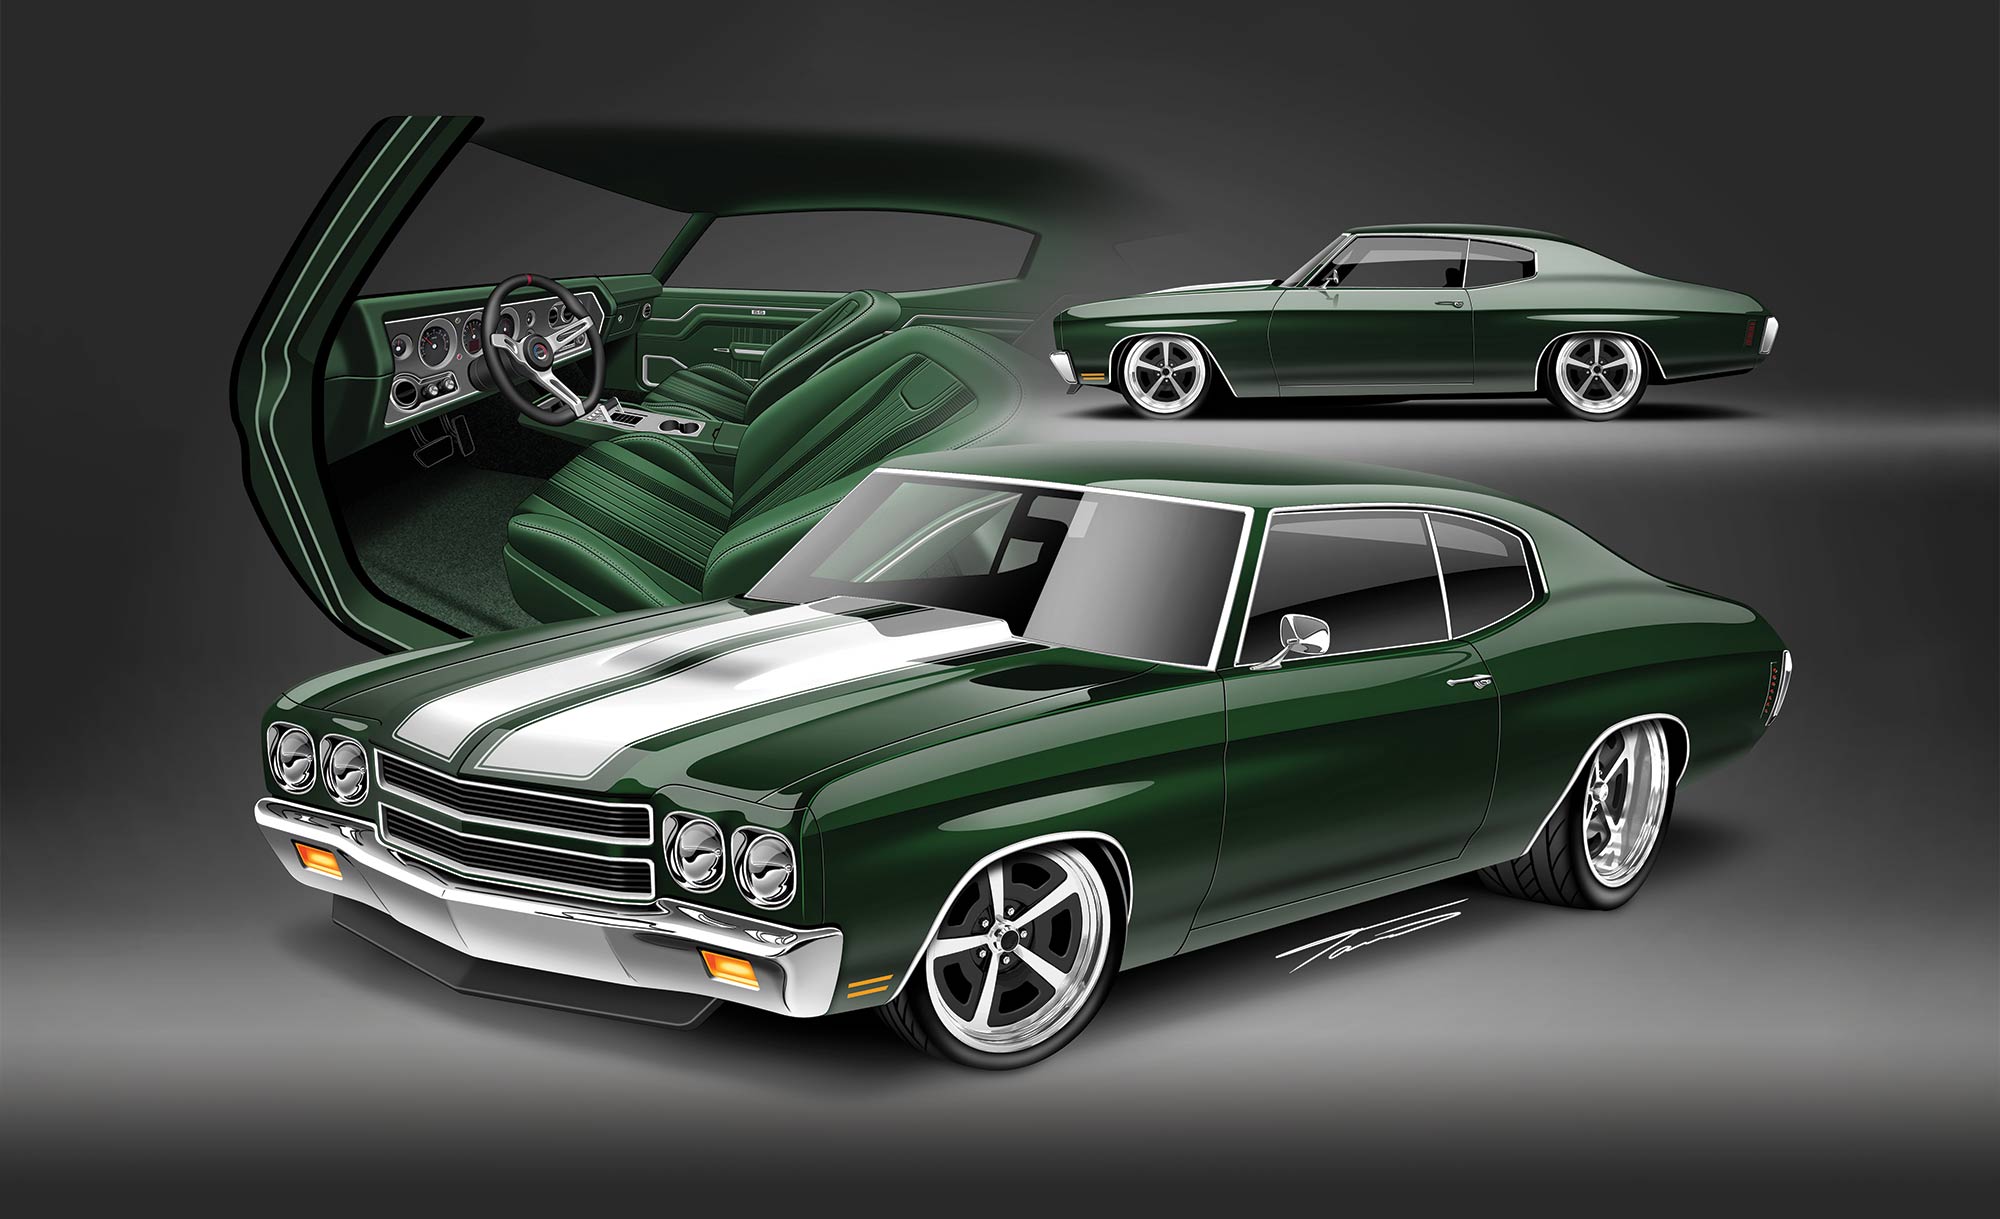 digital illustration of a Chevelle series car and its interior